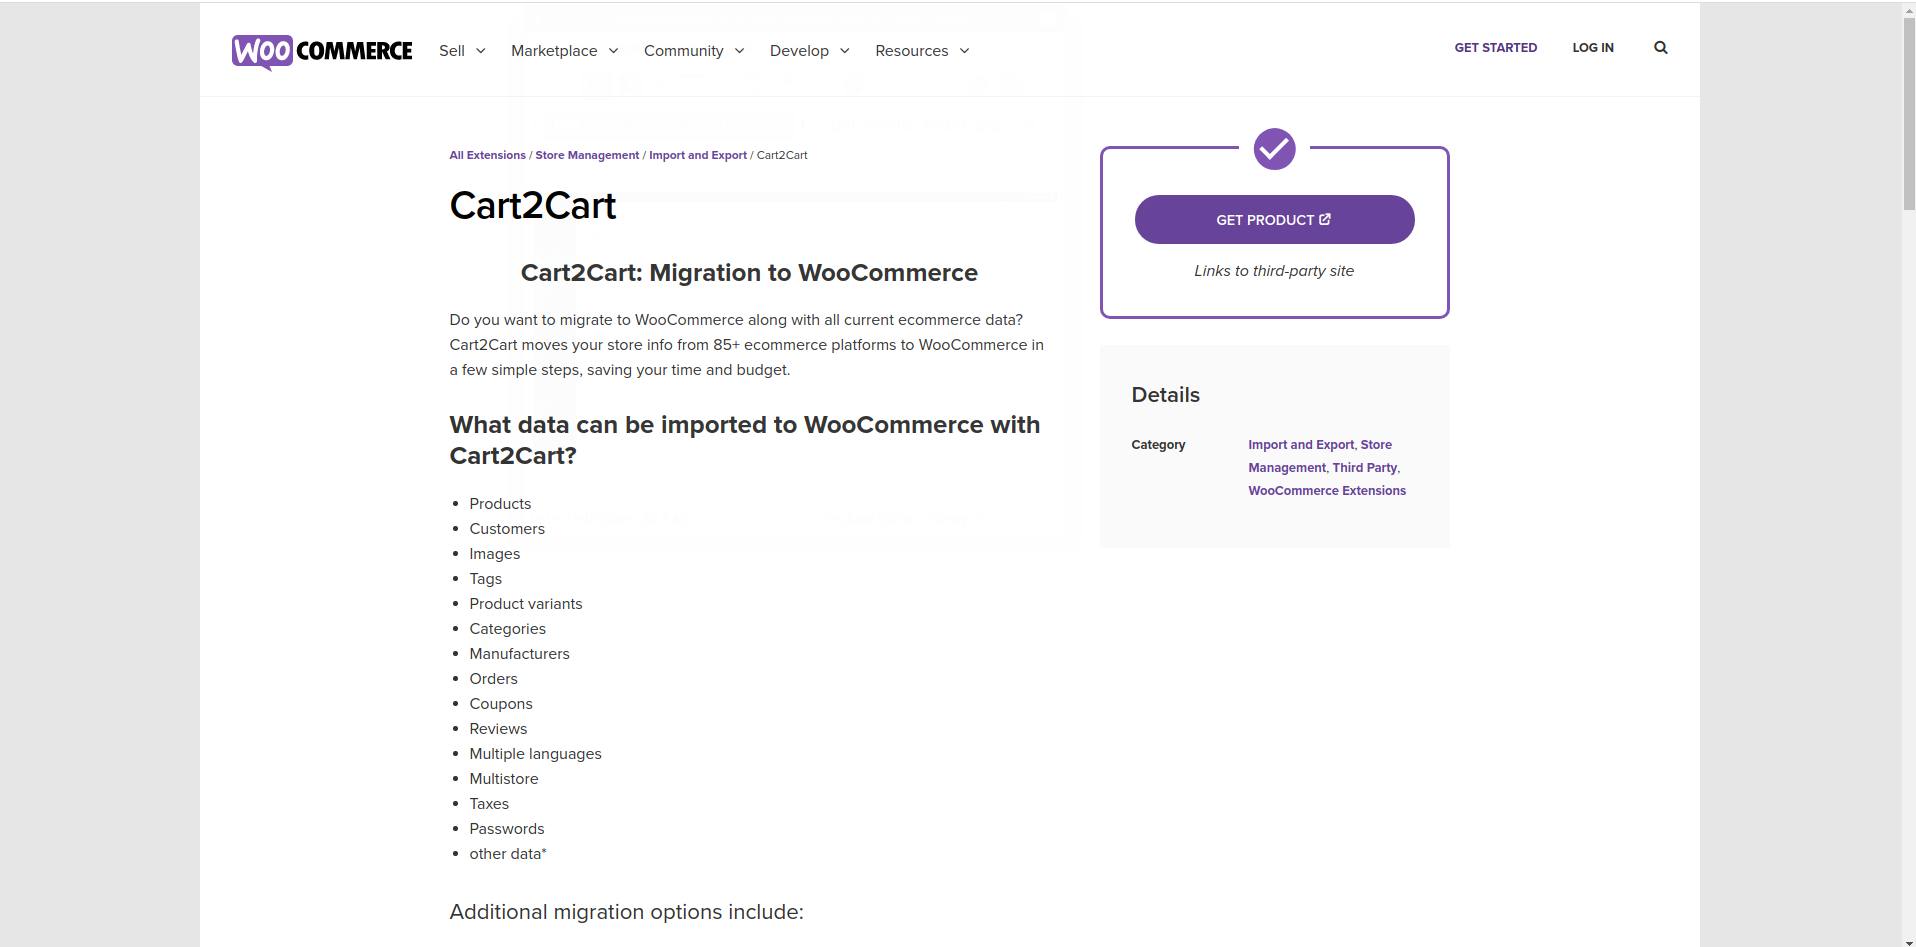 Cart2Cart Migration Is Now A Built-In Option In The WooCommerce Dashboard